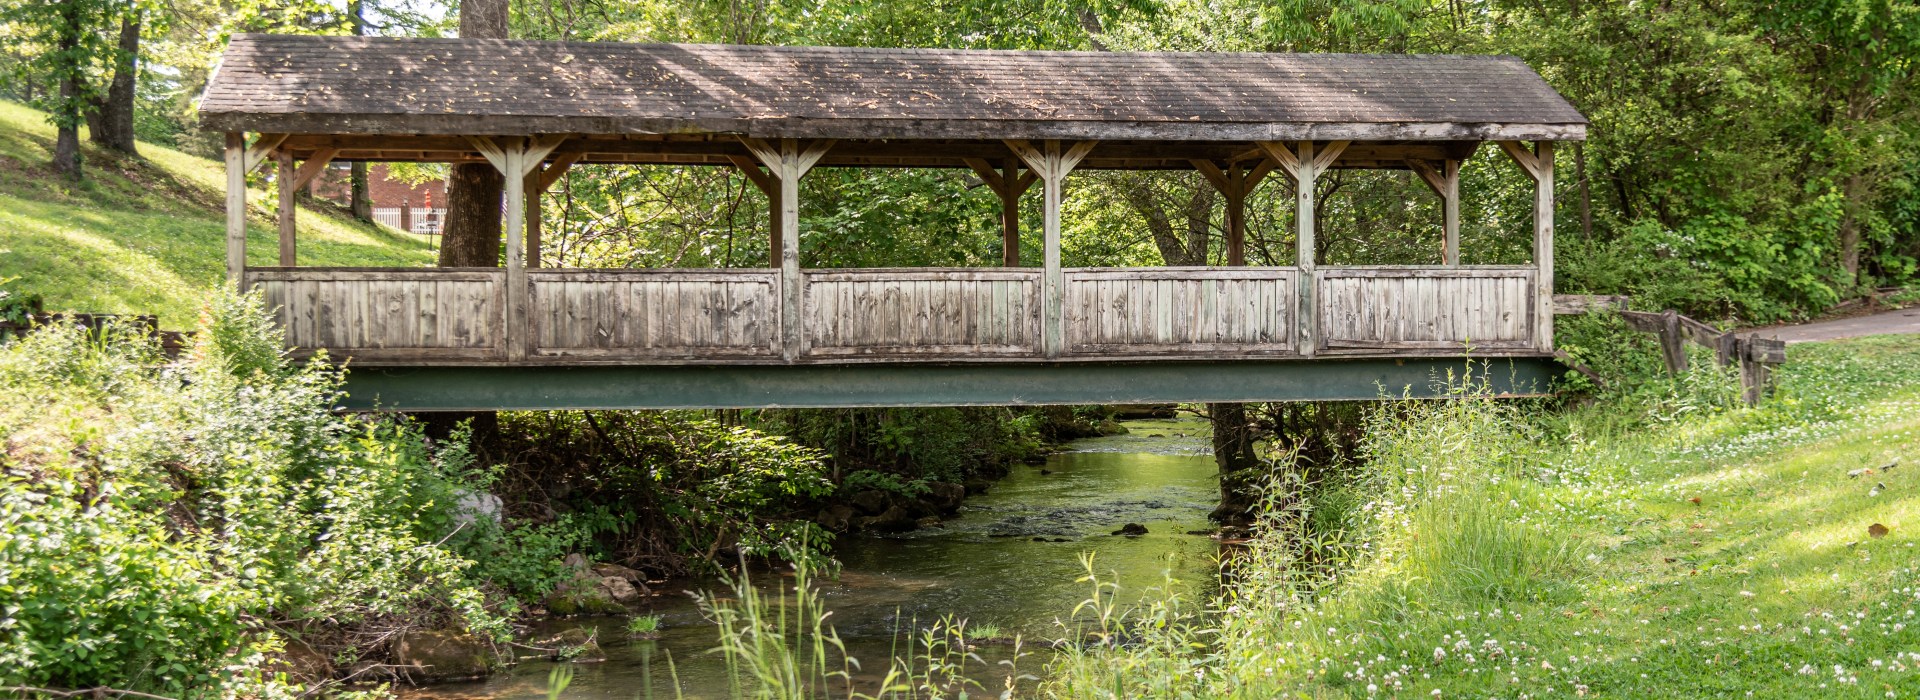 Covered wooden bridge over a lake a the course